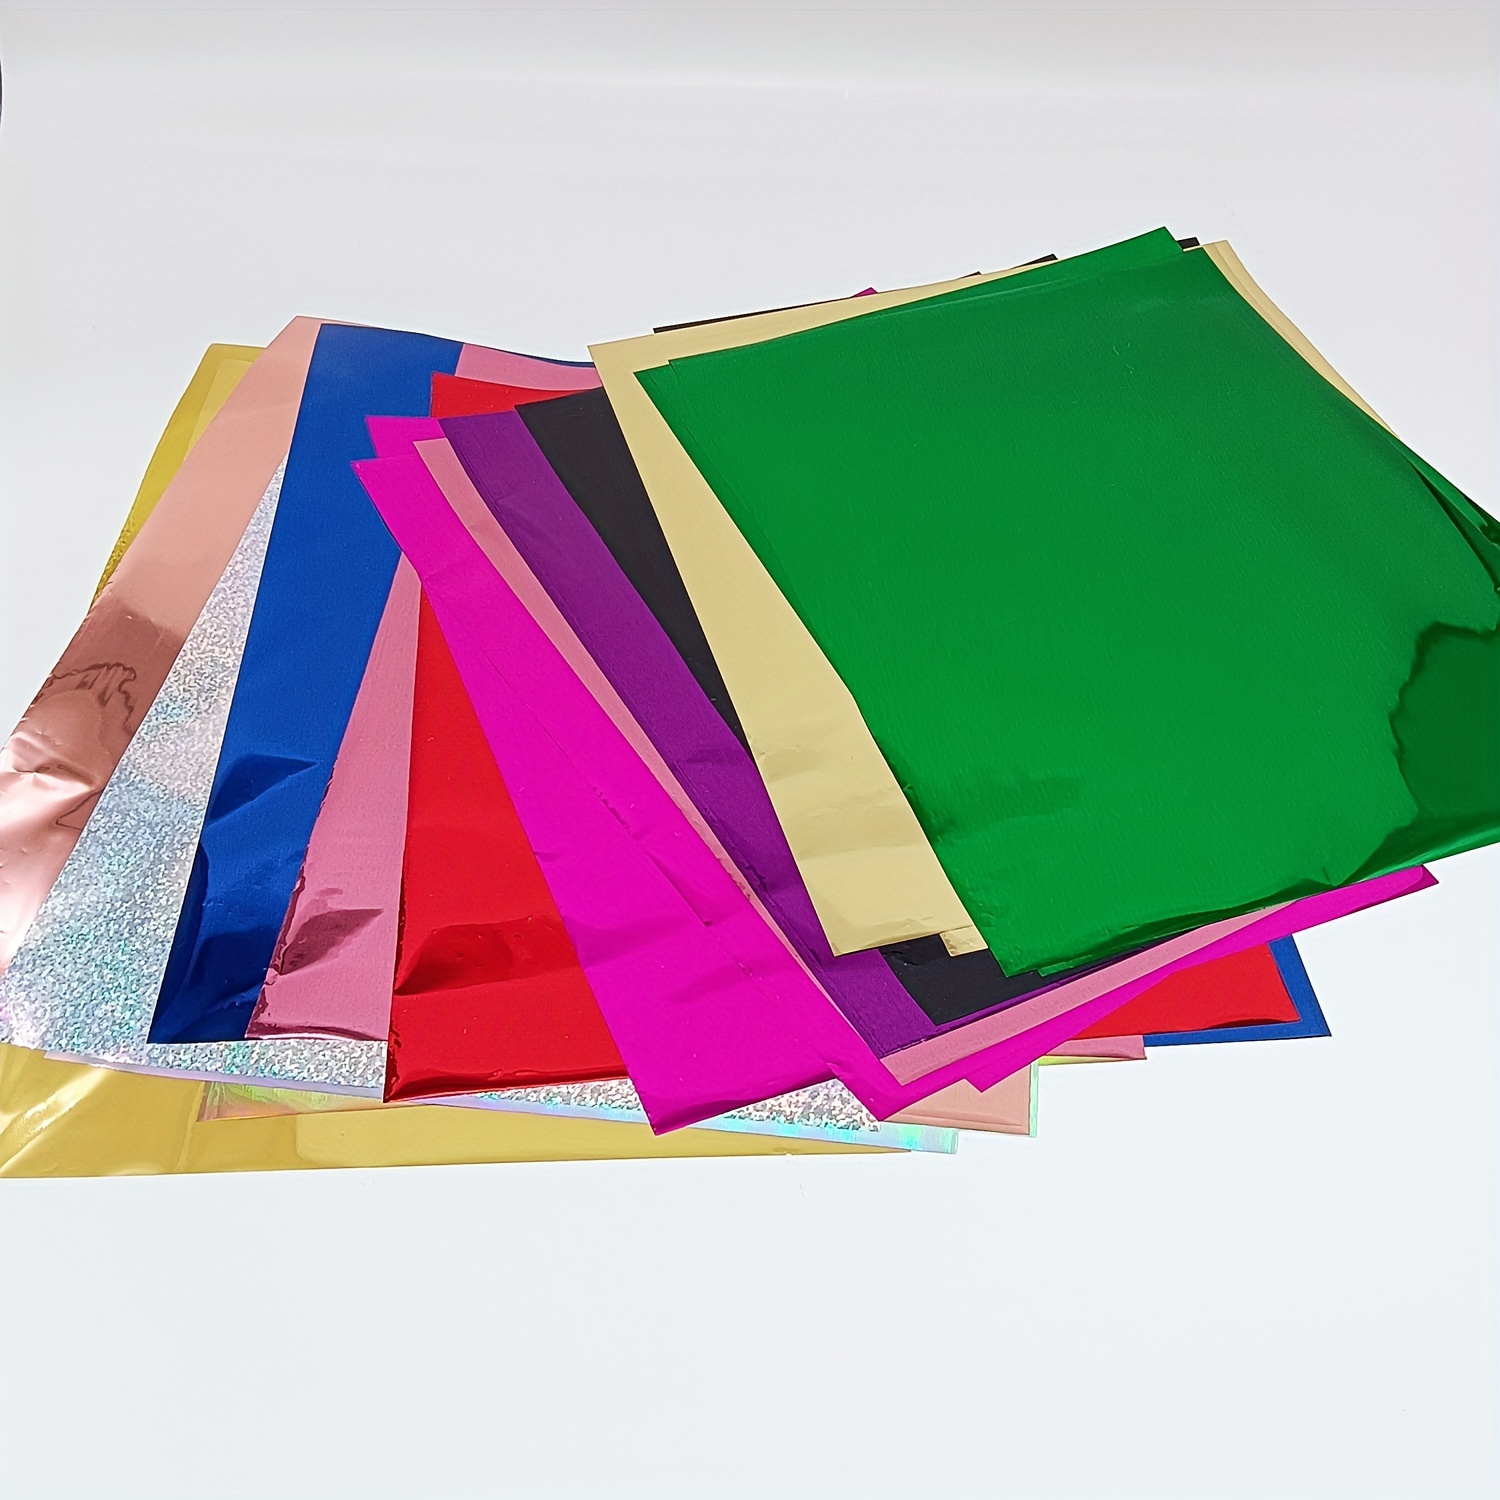 

Alinacutle Metallic Foil Transfer Sheets, 50 Sheets A4 Size, 16 Assorted Colors, Aluminum Loose Sheets For Scrapbooking, Paper Crafts, Invitations, Greeting Cards Decoration